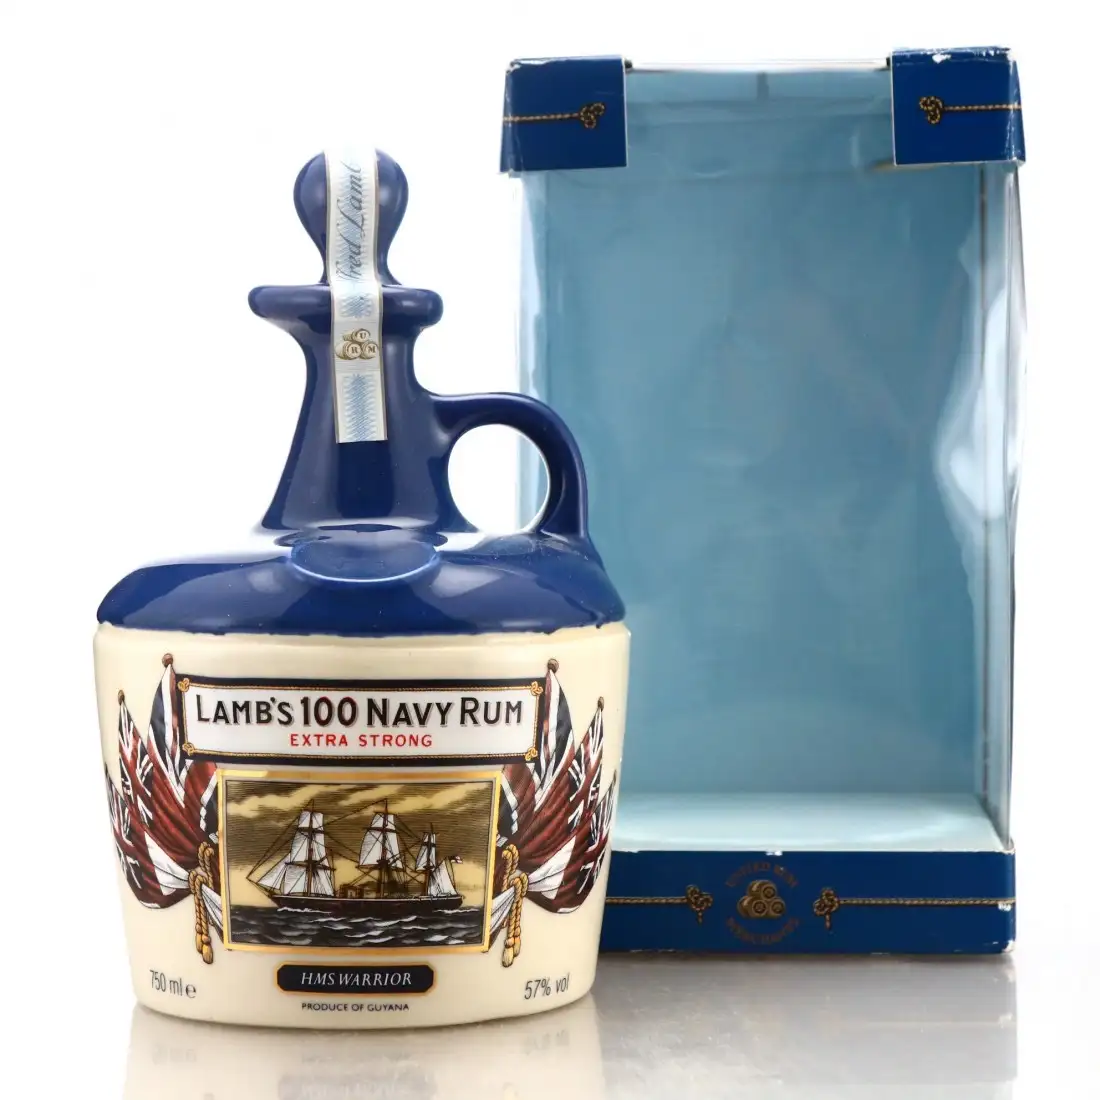 Image of the front of the bottle of the rum Lamb‘s Lamb's 100 Navy Rum HMS Warrior